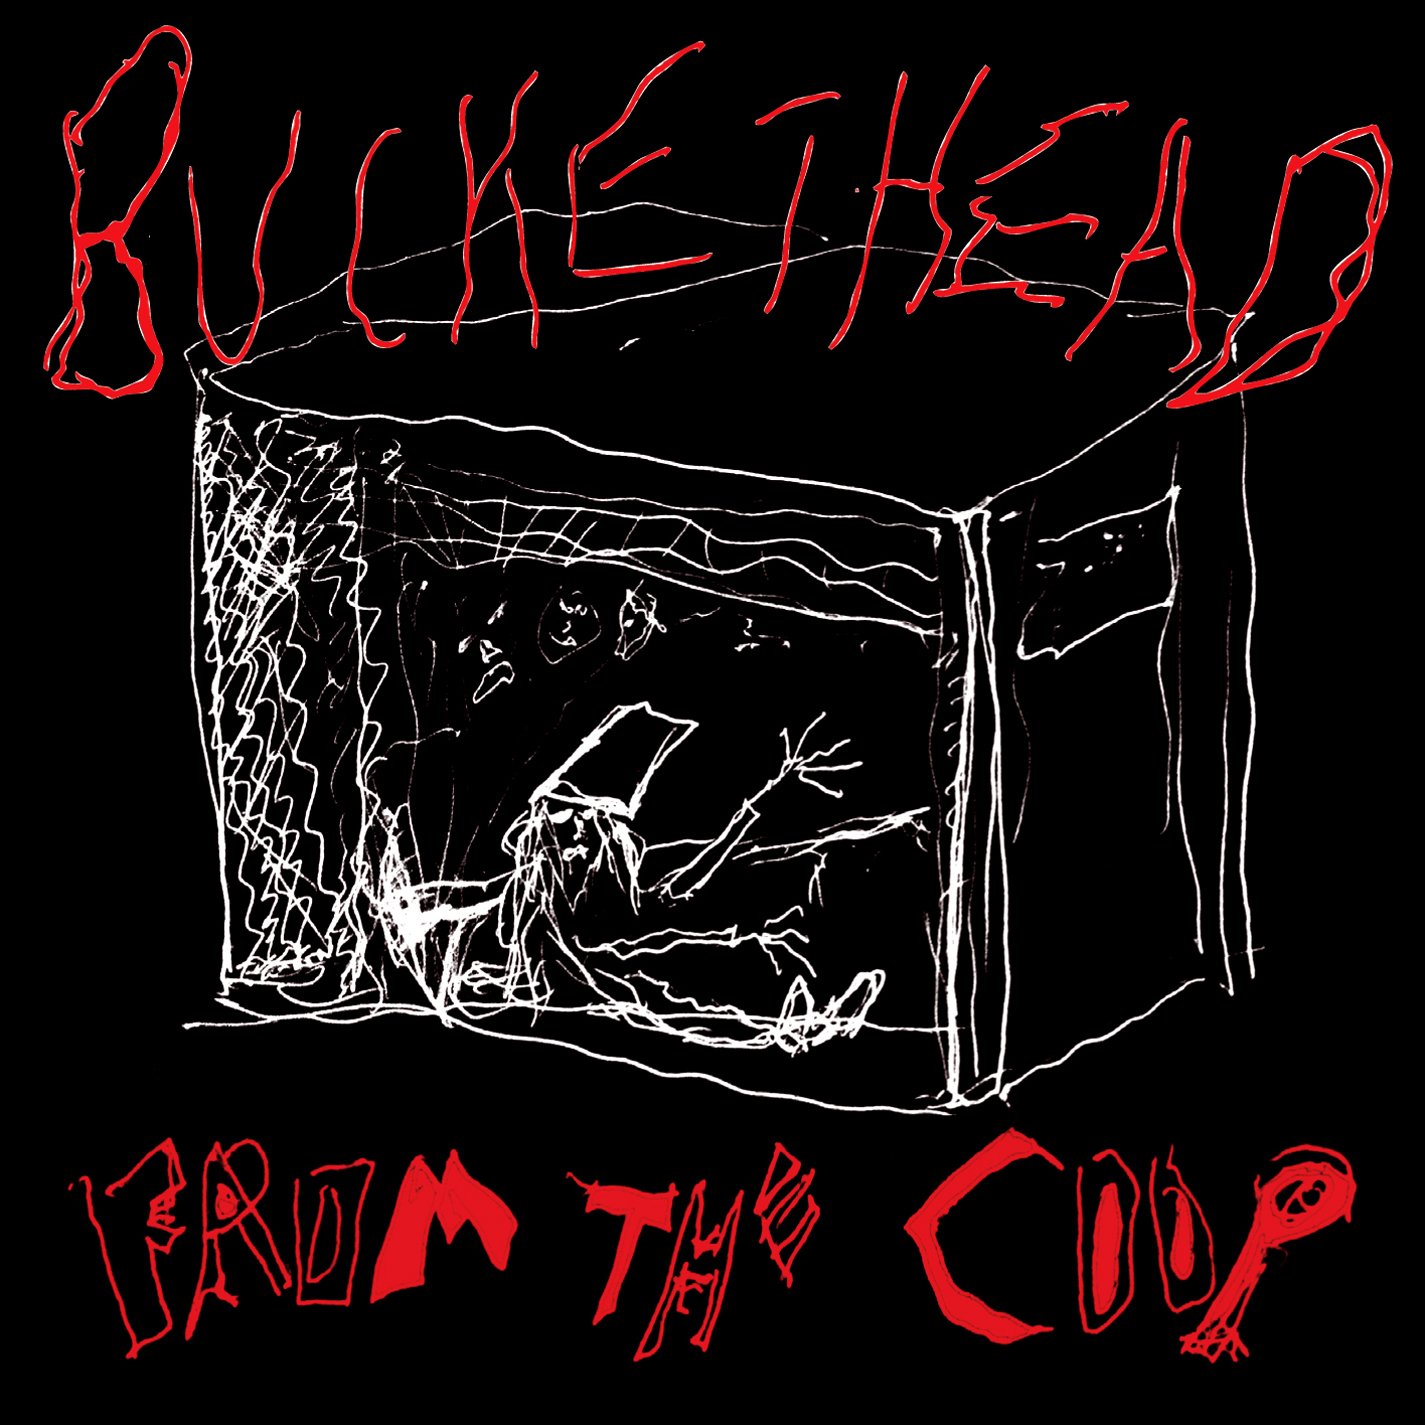 Buckethead-From the Coop-CD-FLAC-2008-GRAVEWISH Download